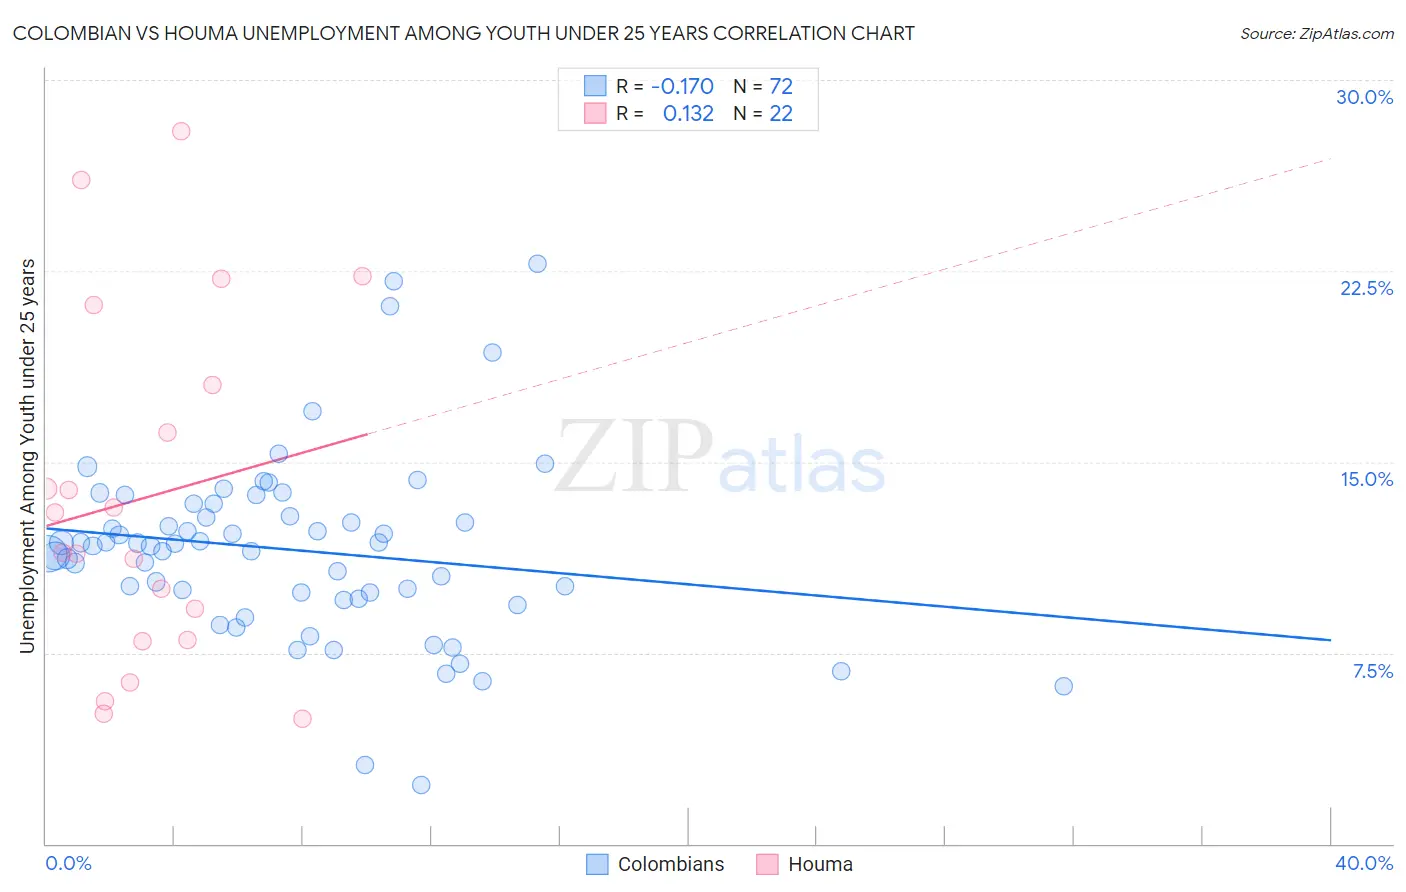 Colombian vs Houma Unemployment Among Youth under 25 years